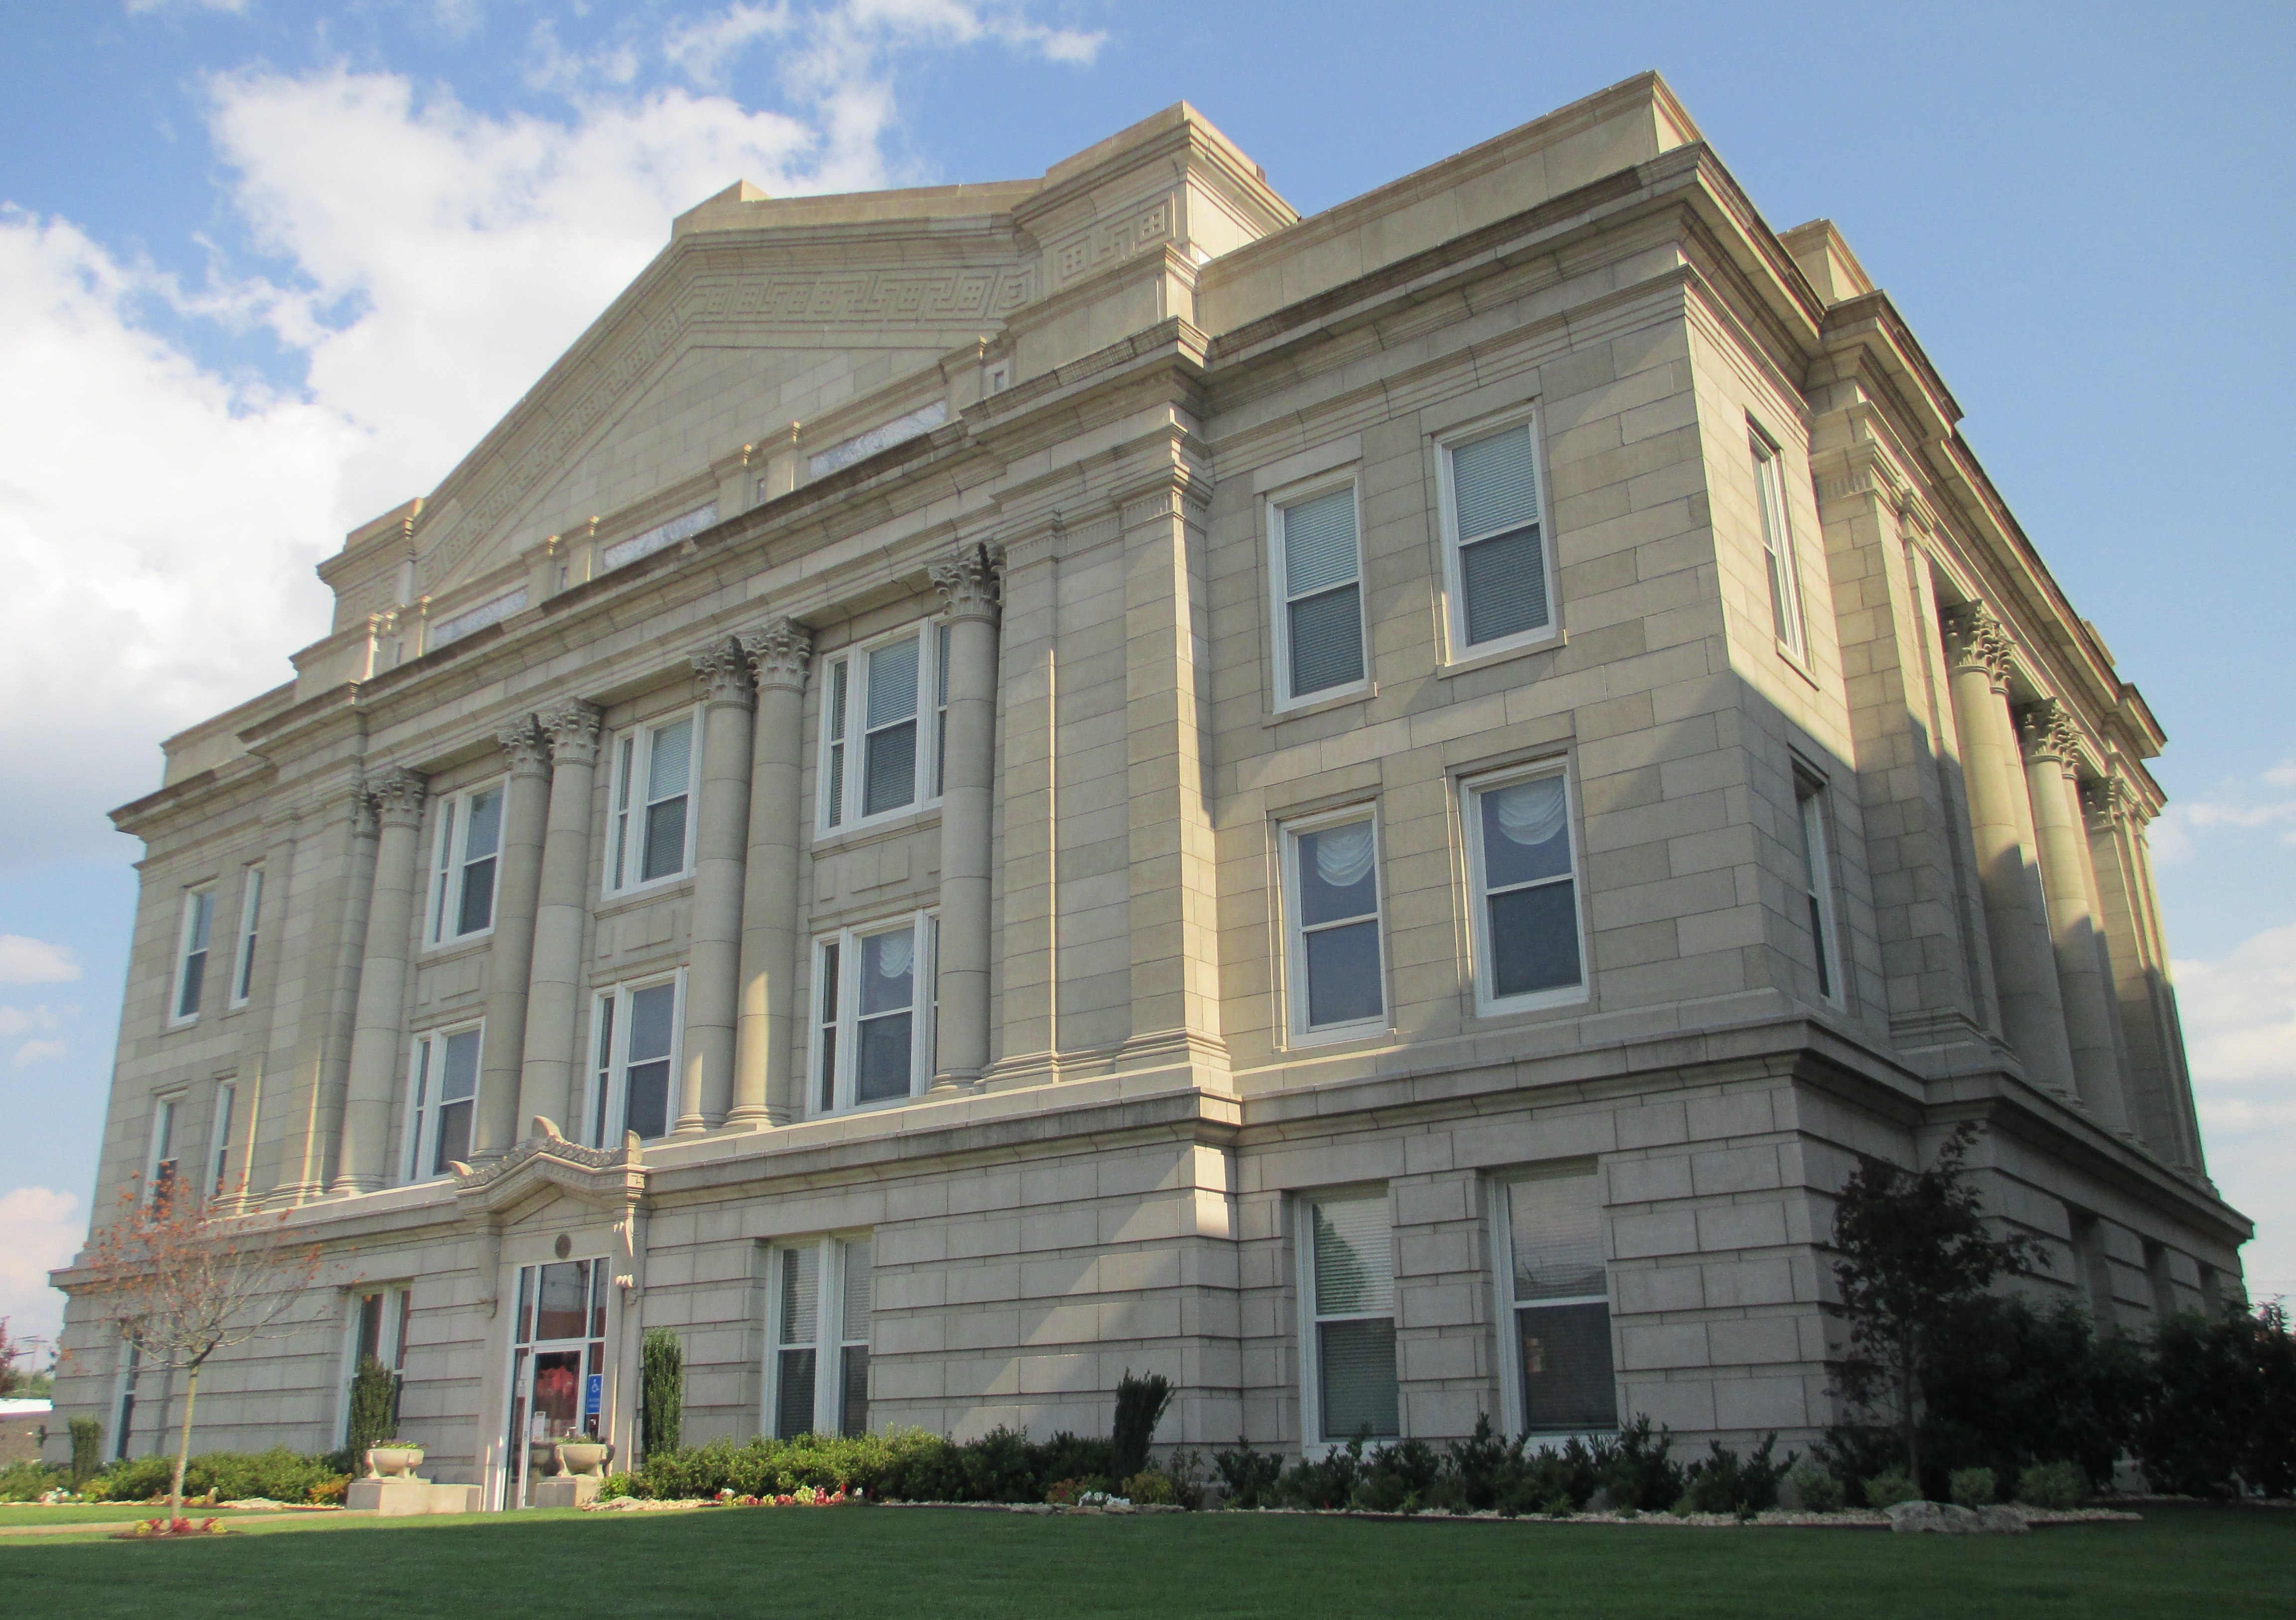 The Creek County Courthouse in Sapulpa, Oklahoma (Jordan McAlister—Flickr Vision/Getty Images)